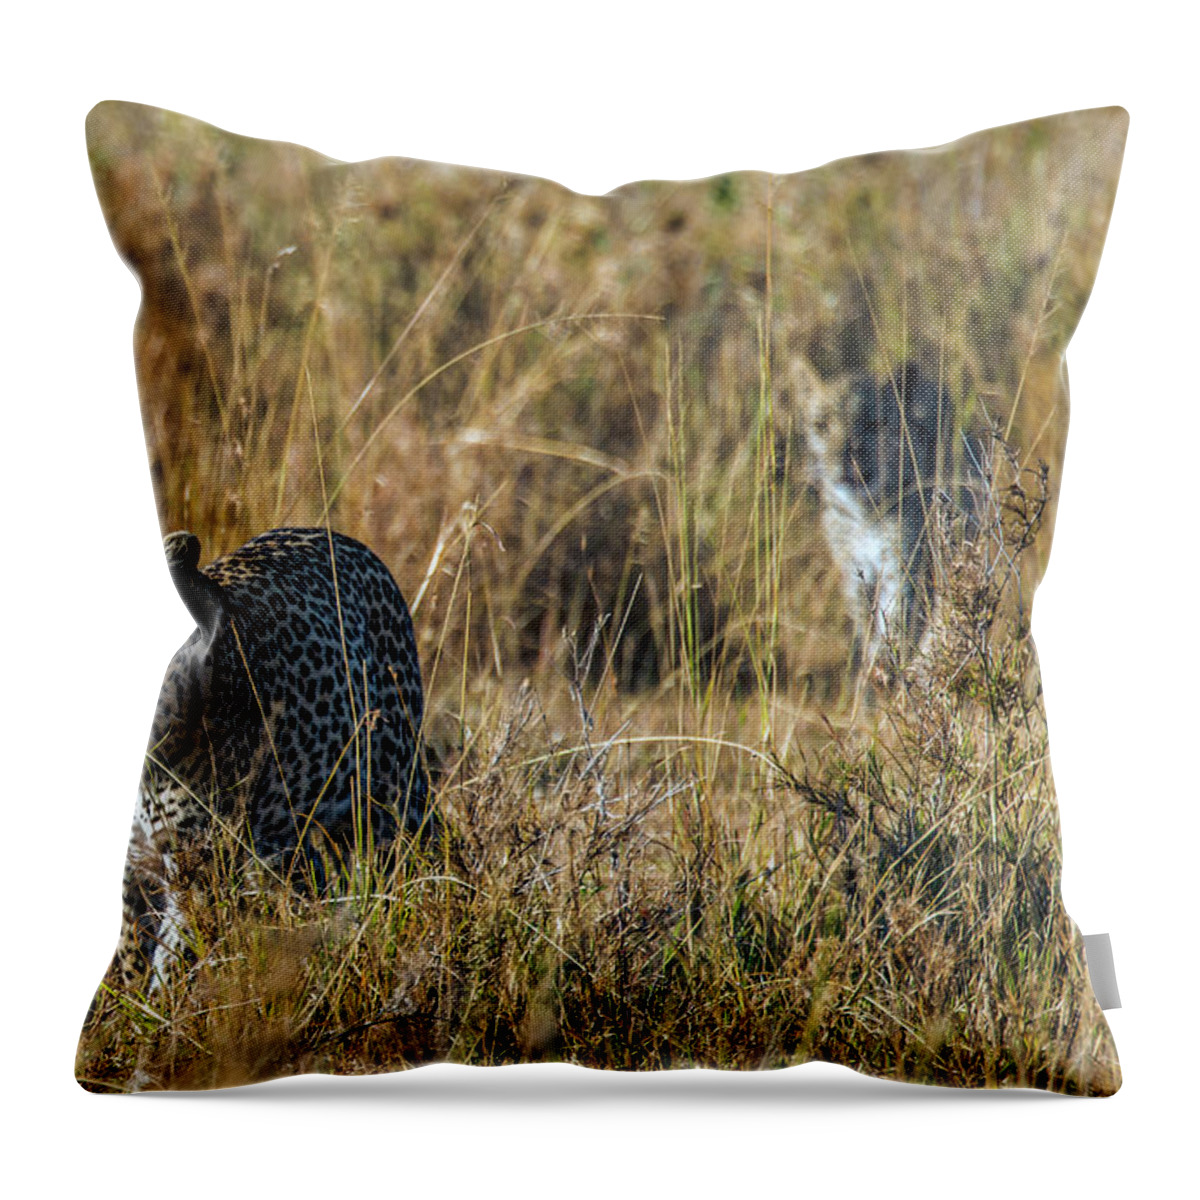 Grass Throw Pillow featuring the photograph Leopards by Jnhphoto